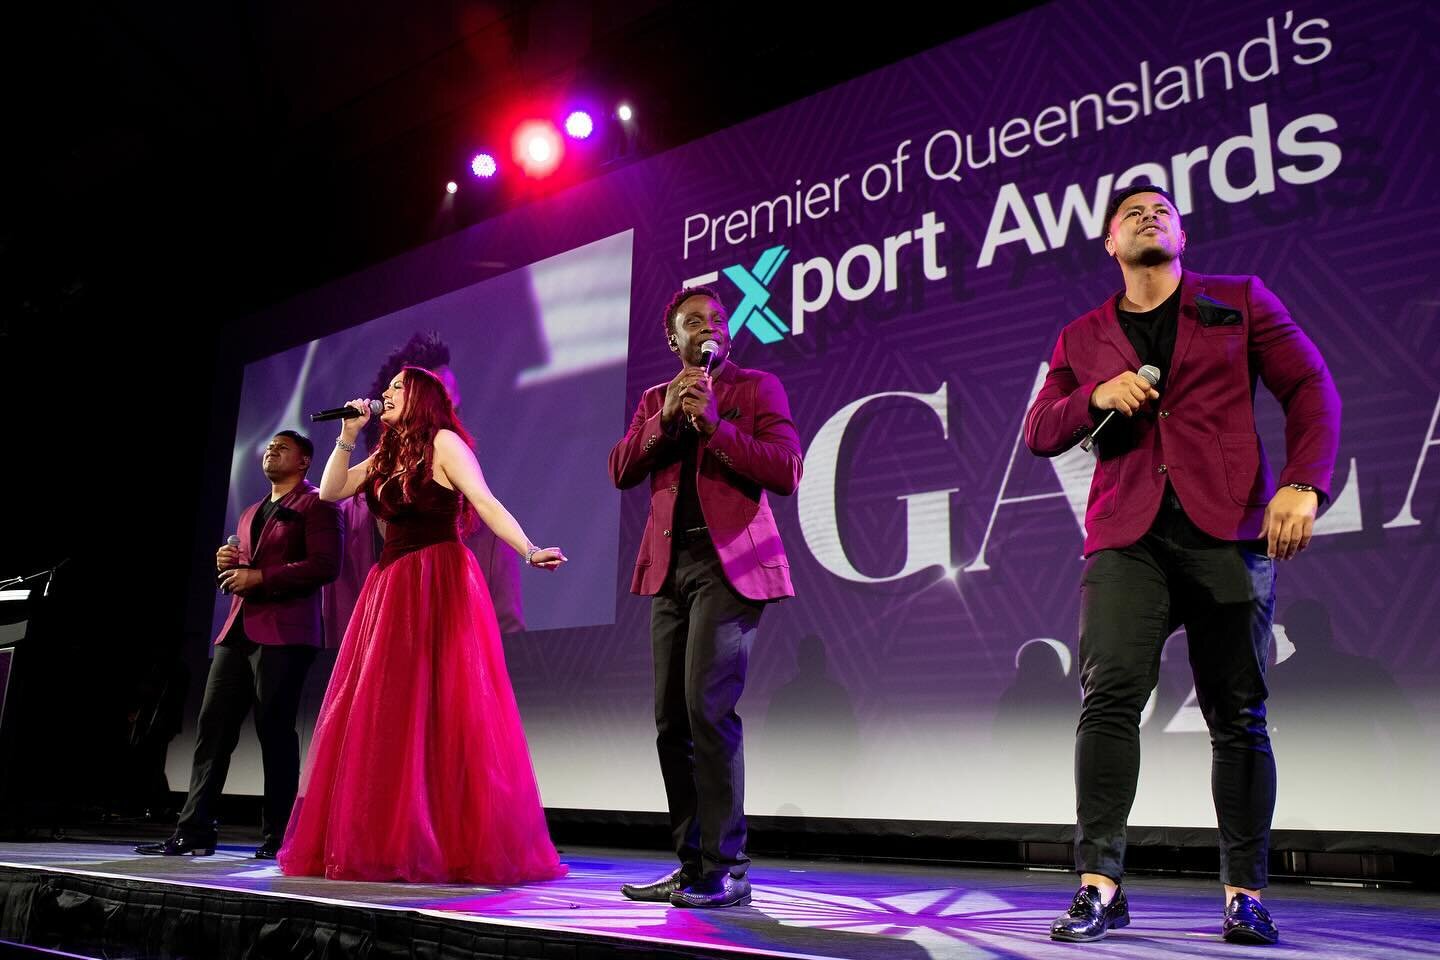 It was the greatest honour to curate a bespoke feature performance for the Premier of Queensland&rsquo;s 2023 Export Awards! 🏆

Paying homage to Queensland&rsquo;s exceptional musical exports, our performance featured songs by Savage Garden, Keith U